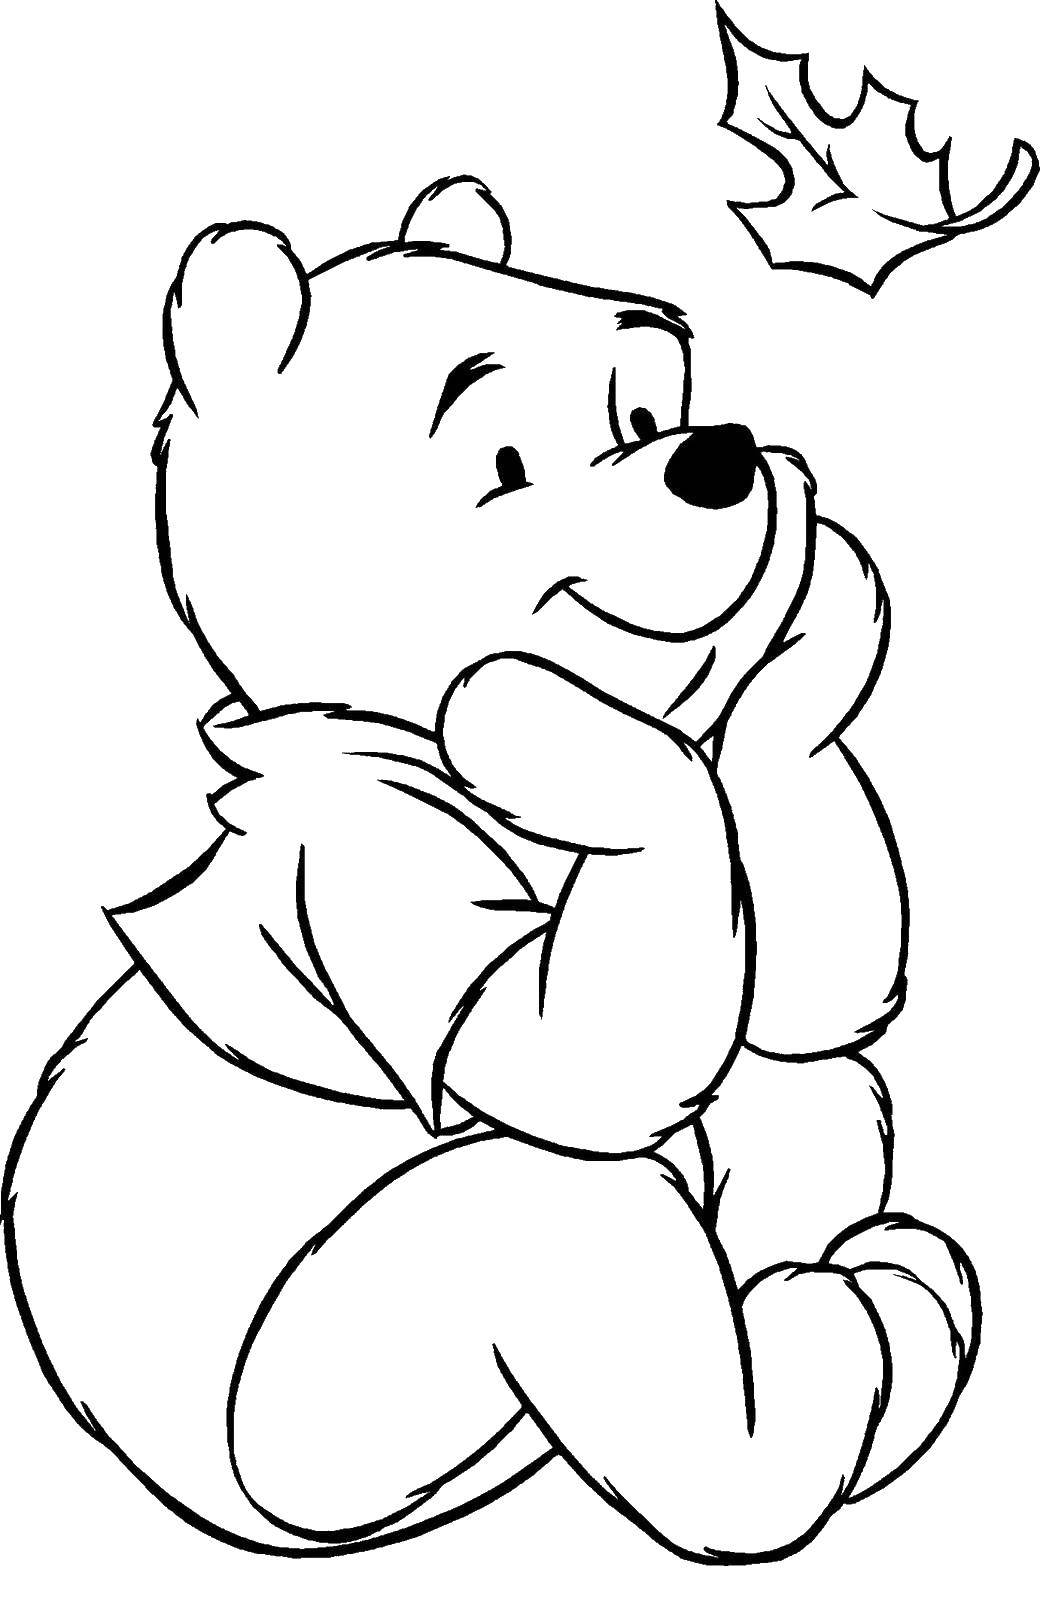 Coloring Winnie the Pooh. Category Cartoon character. Tags:  Cartoon character, Winnie the Pooh.